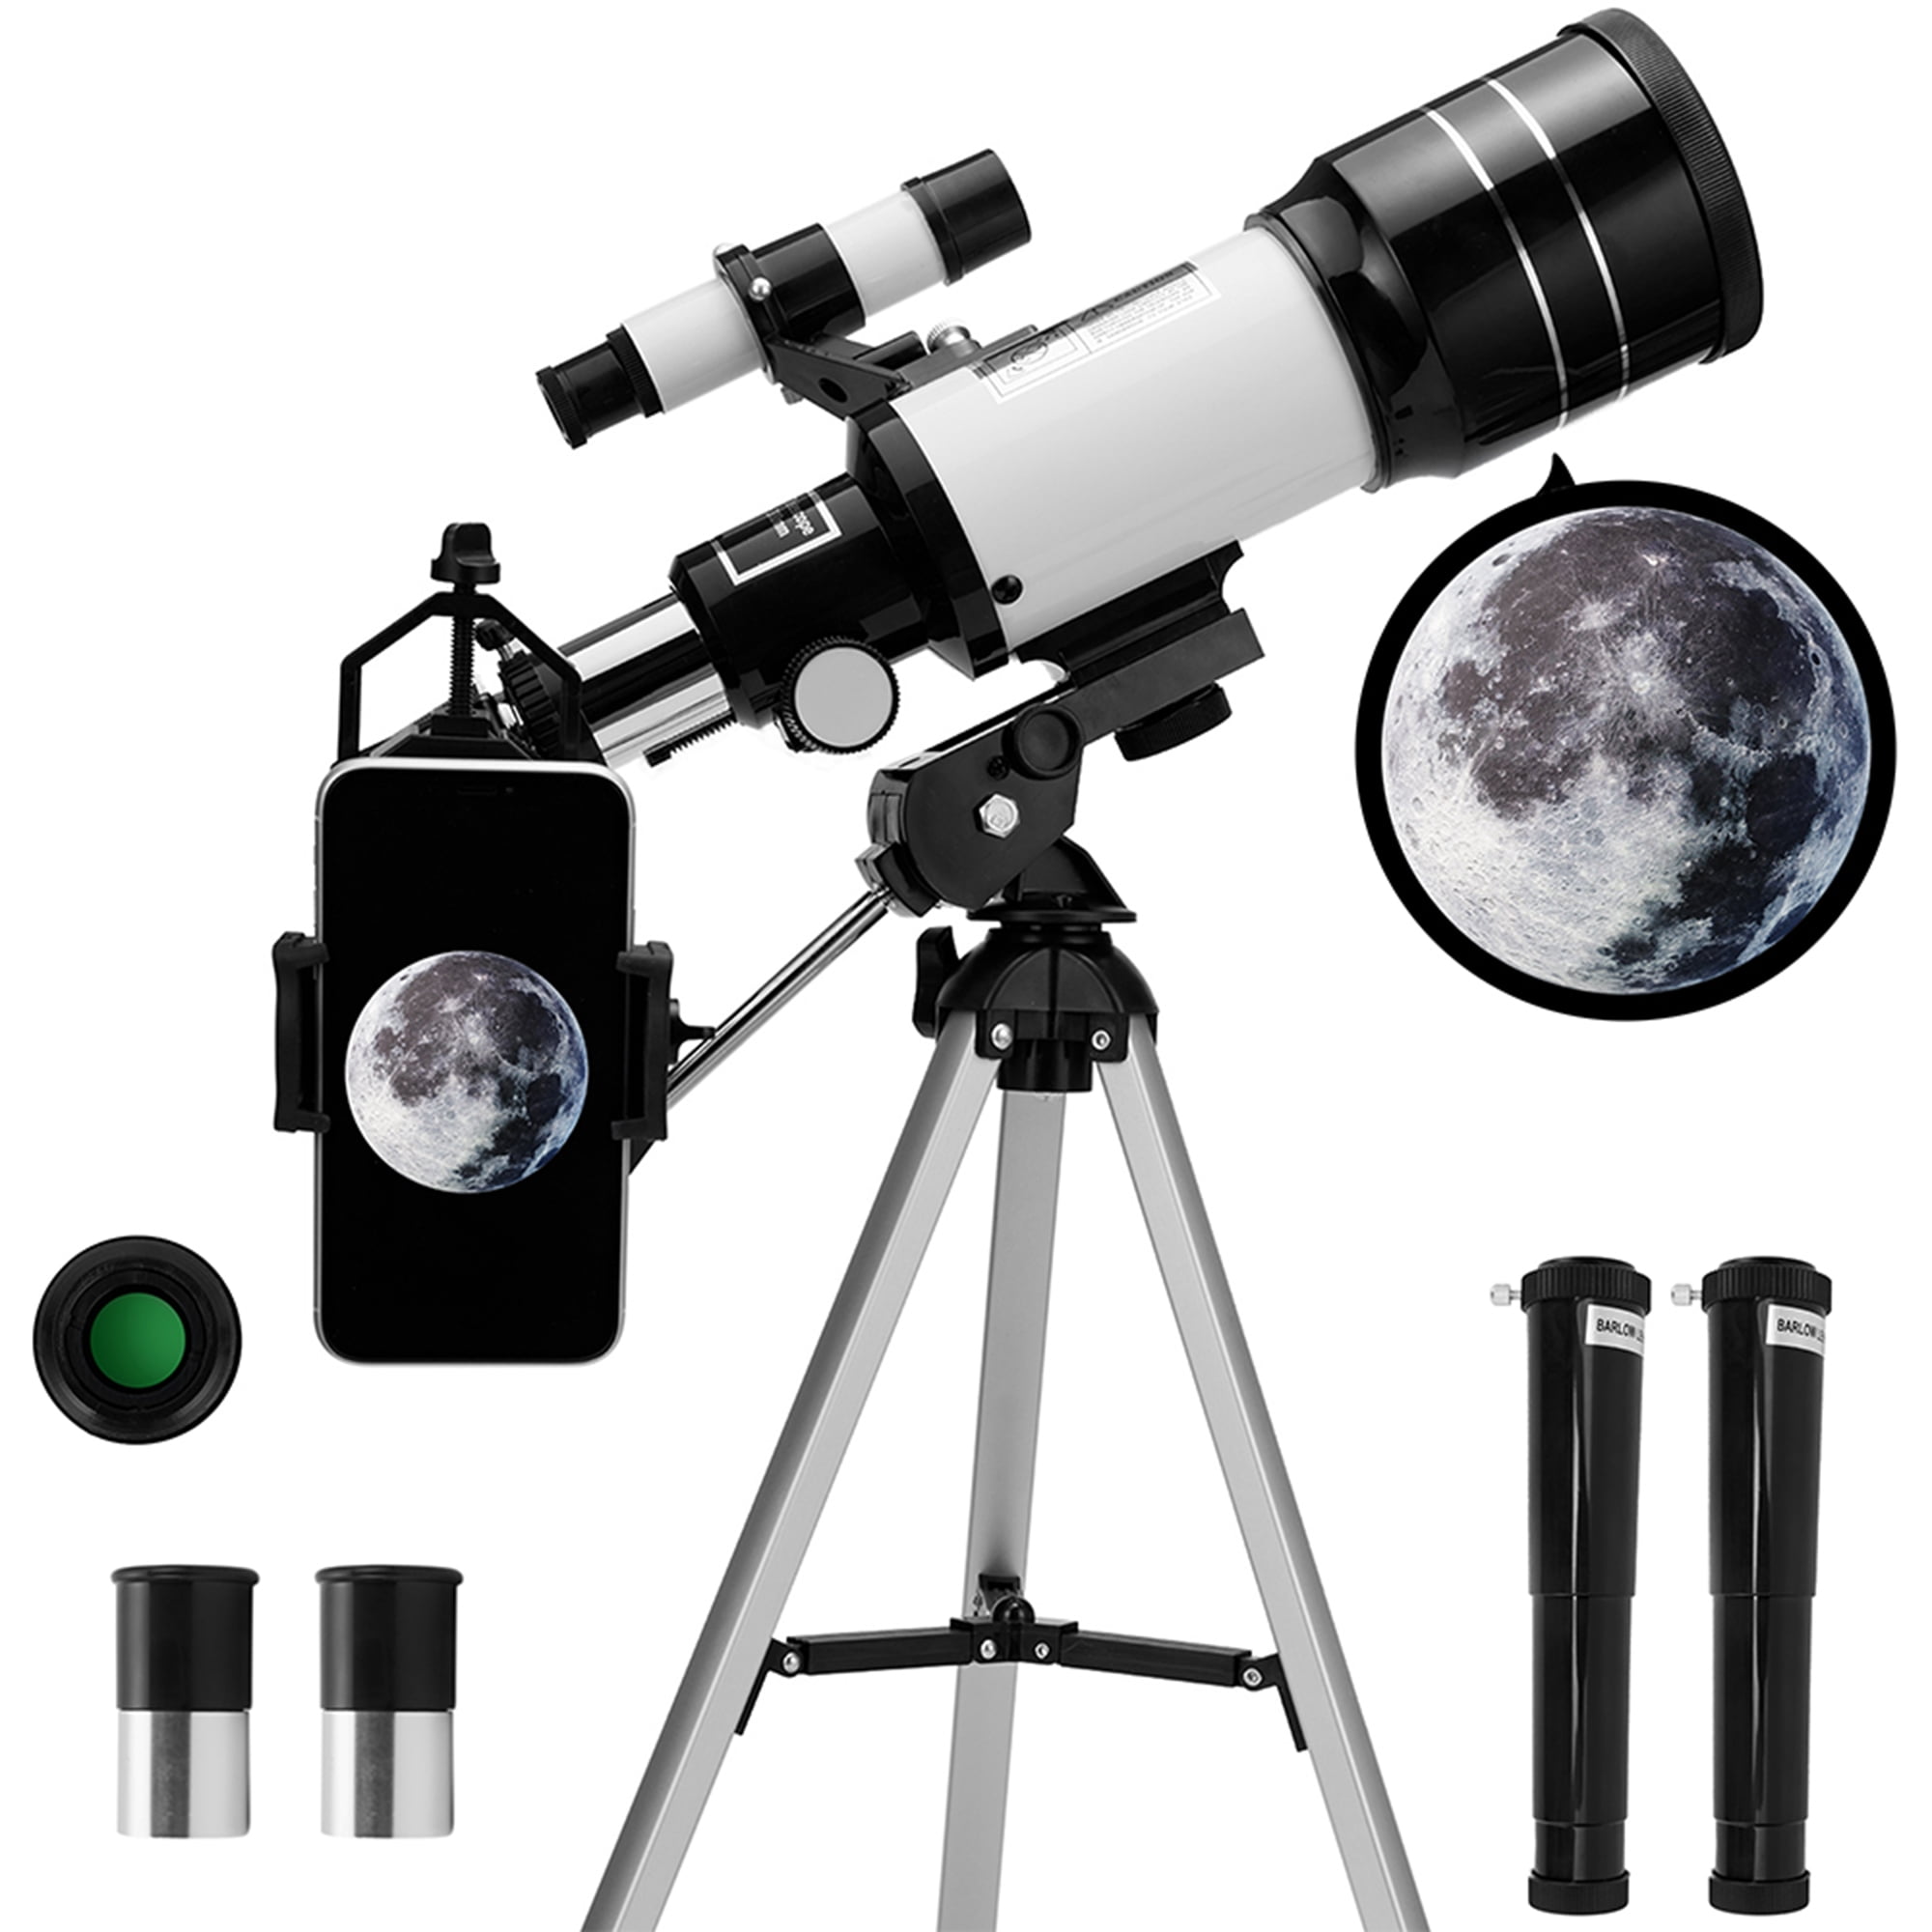 Finder Scope and Four Eyepieces World Optical 150X Magnification Telescope 70mm Refractor Astronomical Telescopes for Kids and Astronomy Beginners HD Large View Portable Travel Scope with Tripod 